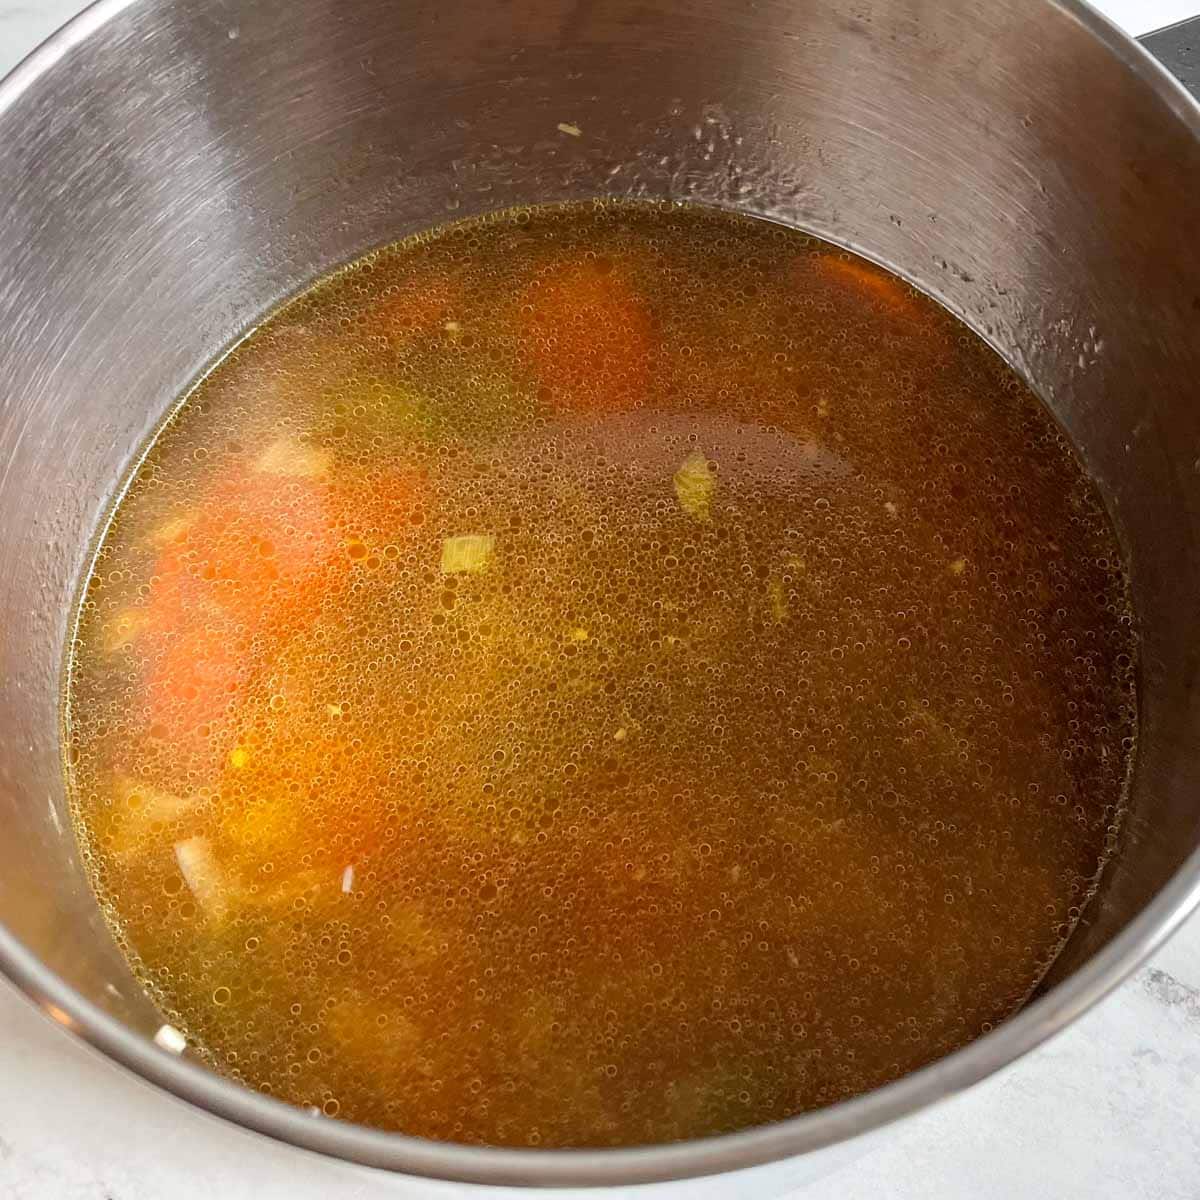 Vegetable broth with sliced carrots, celery, and leek are shown in a stainless steel pot.